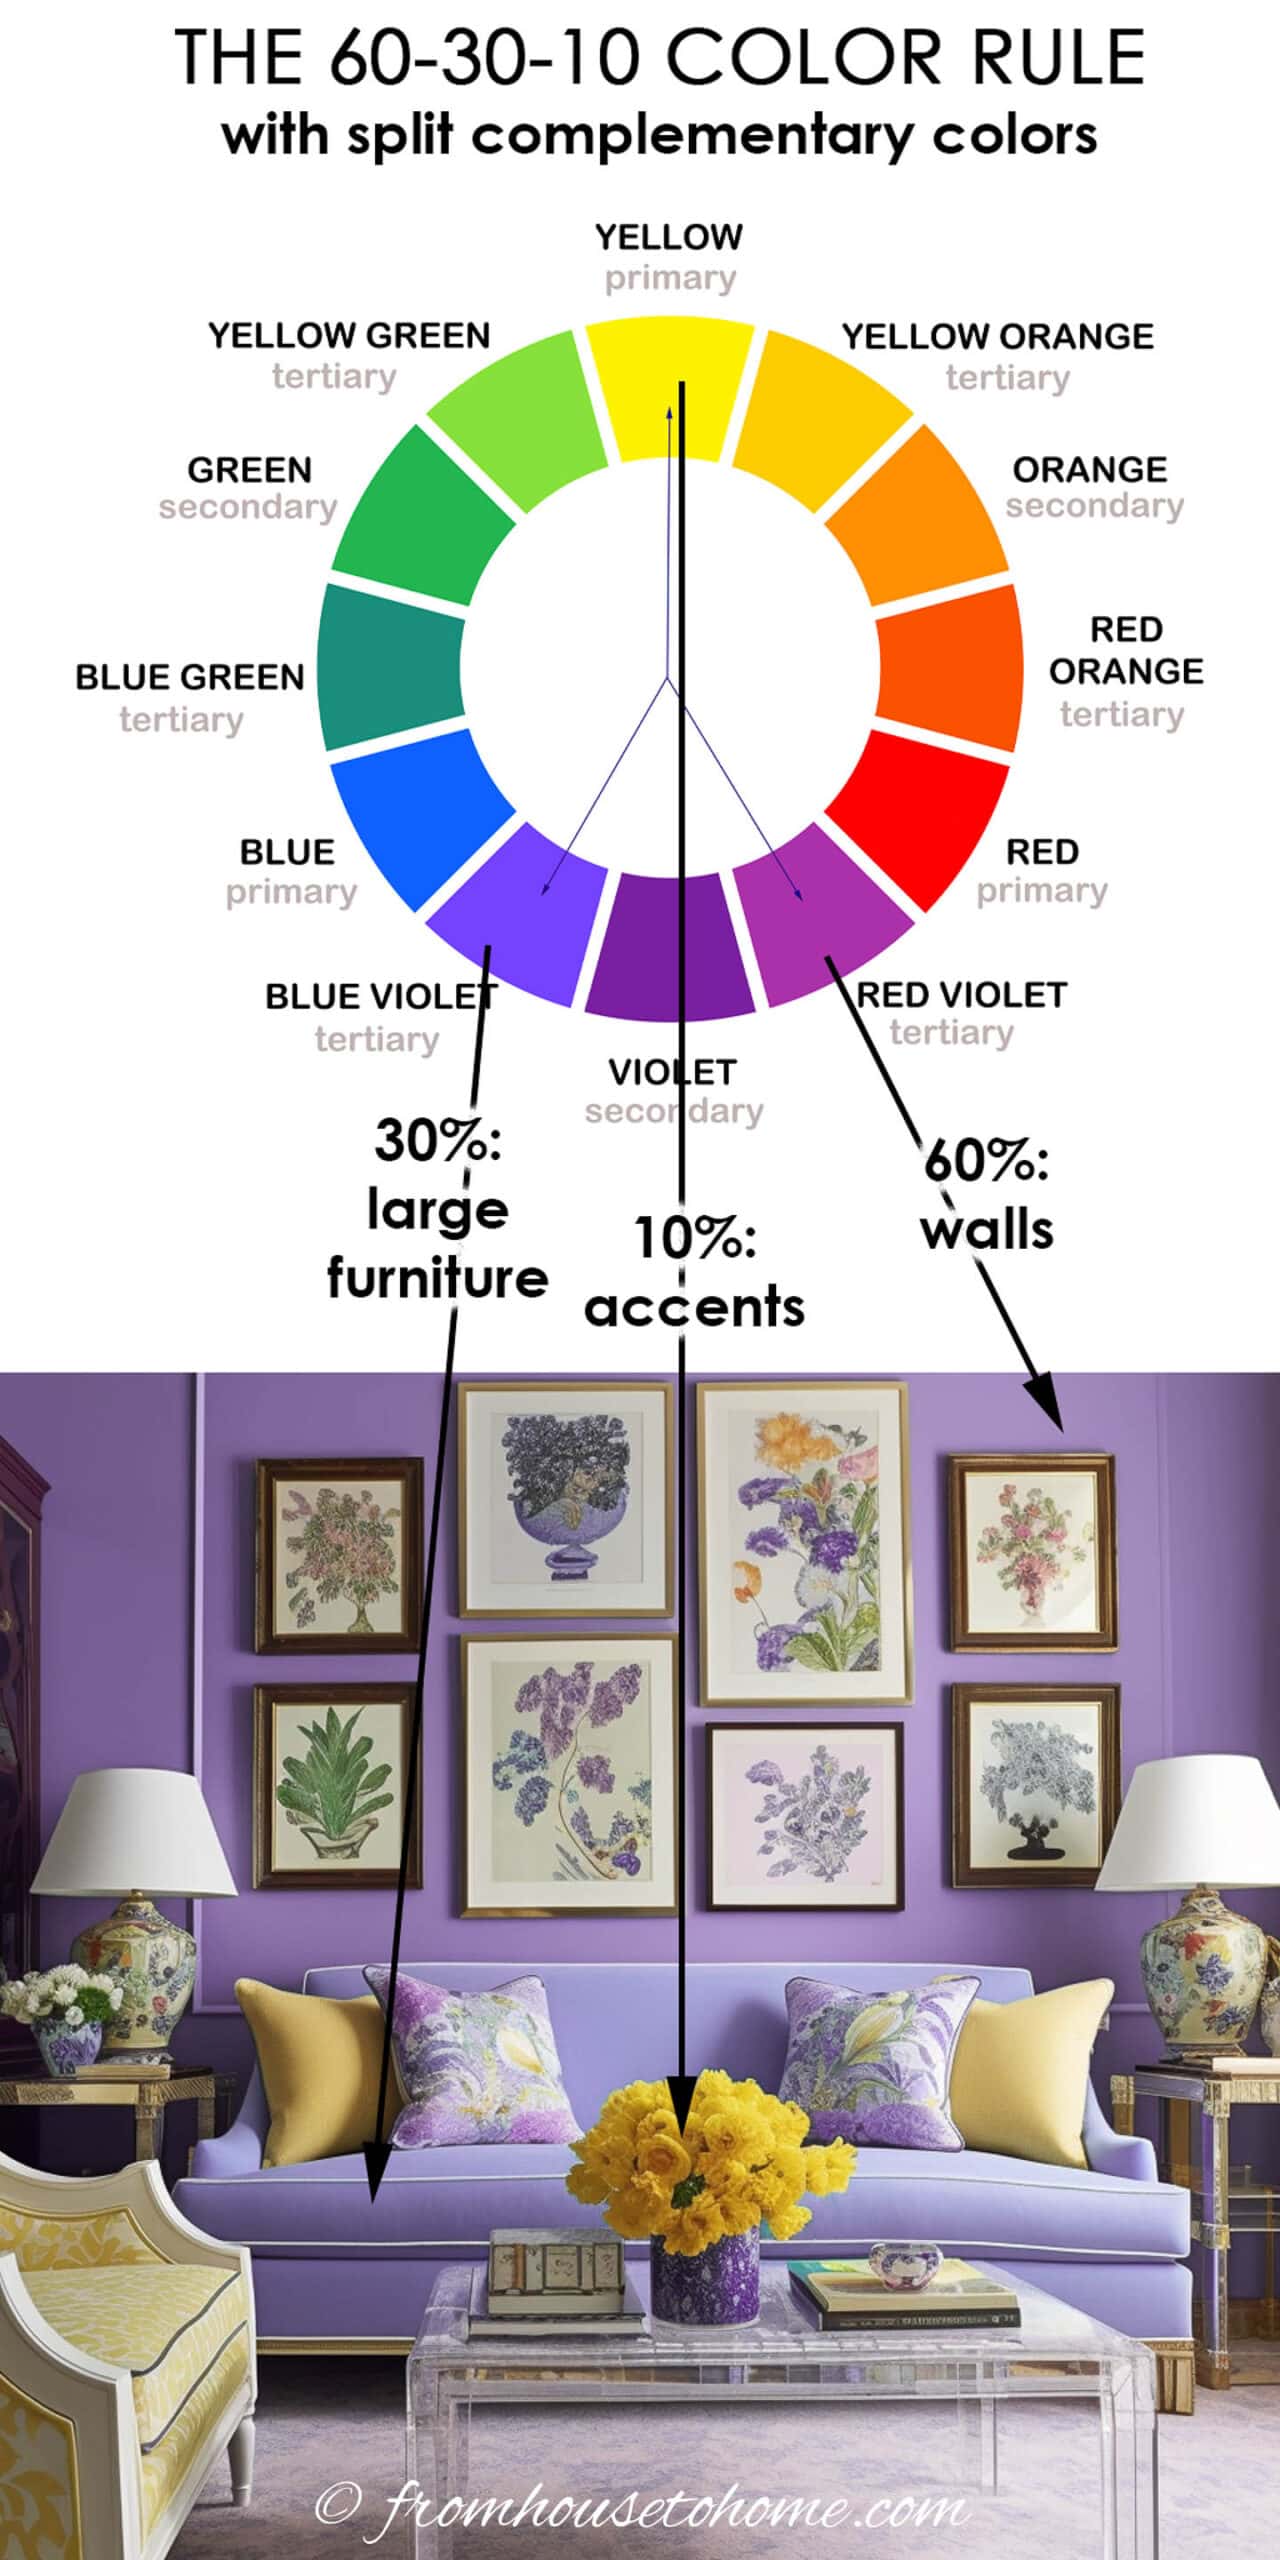 The color wheel showing how to use split complementary colors in a living room blue-purple and red-purple living room with yellow accents